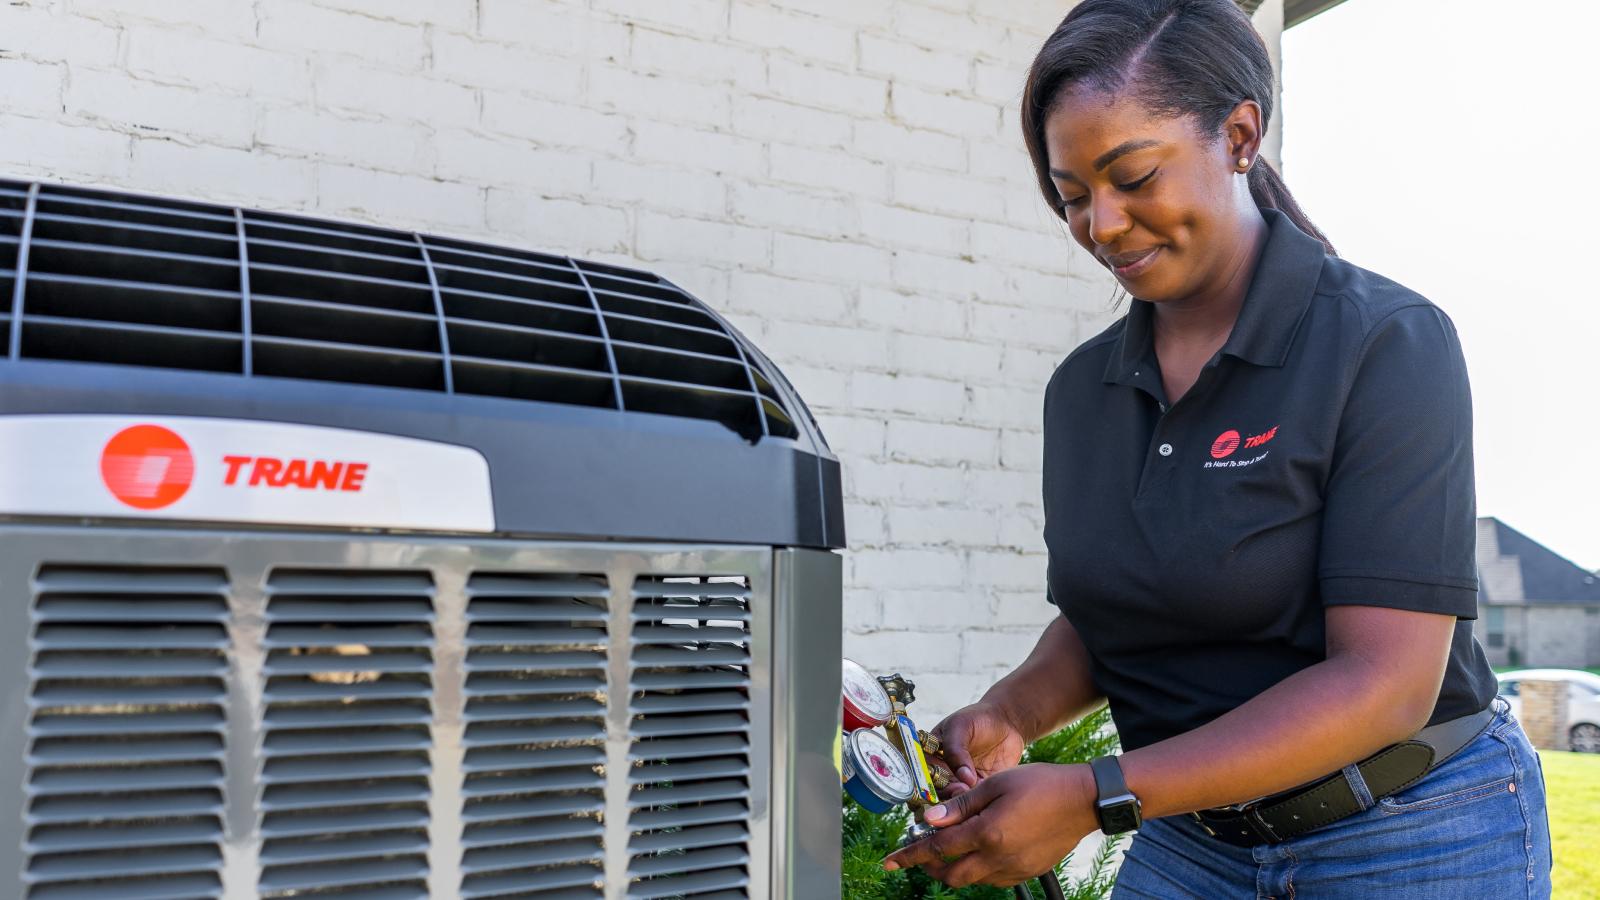 How Much Does A Trane Air Conditioner Cost